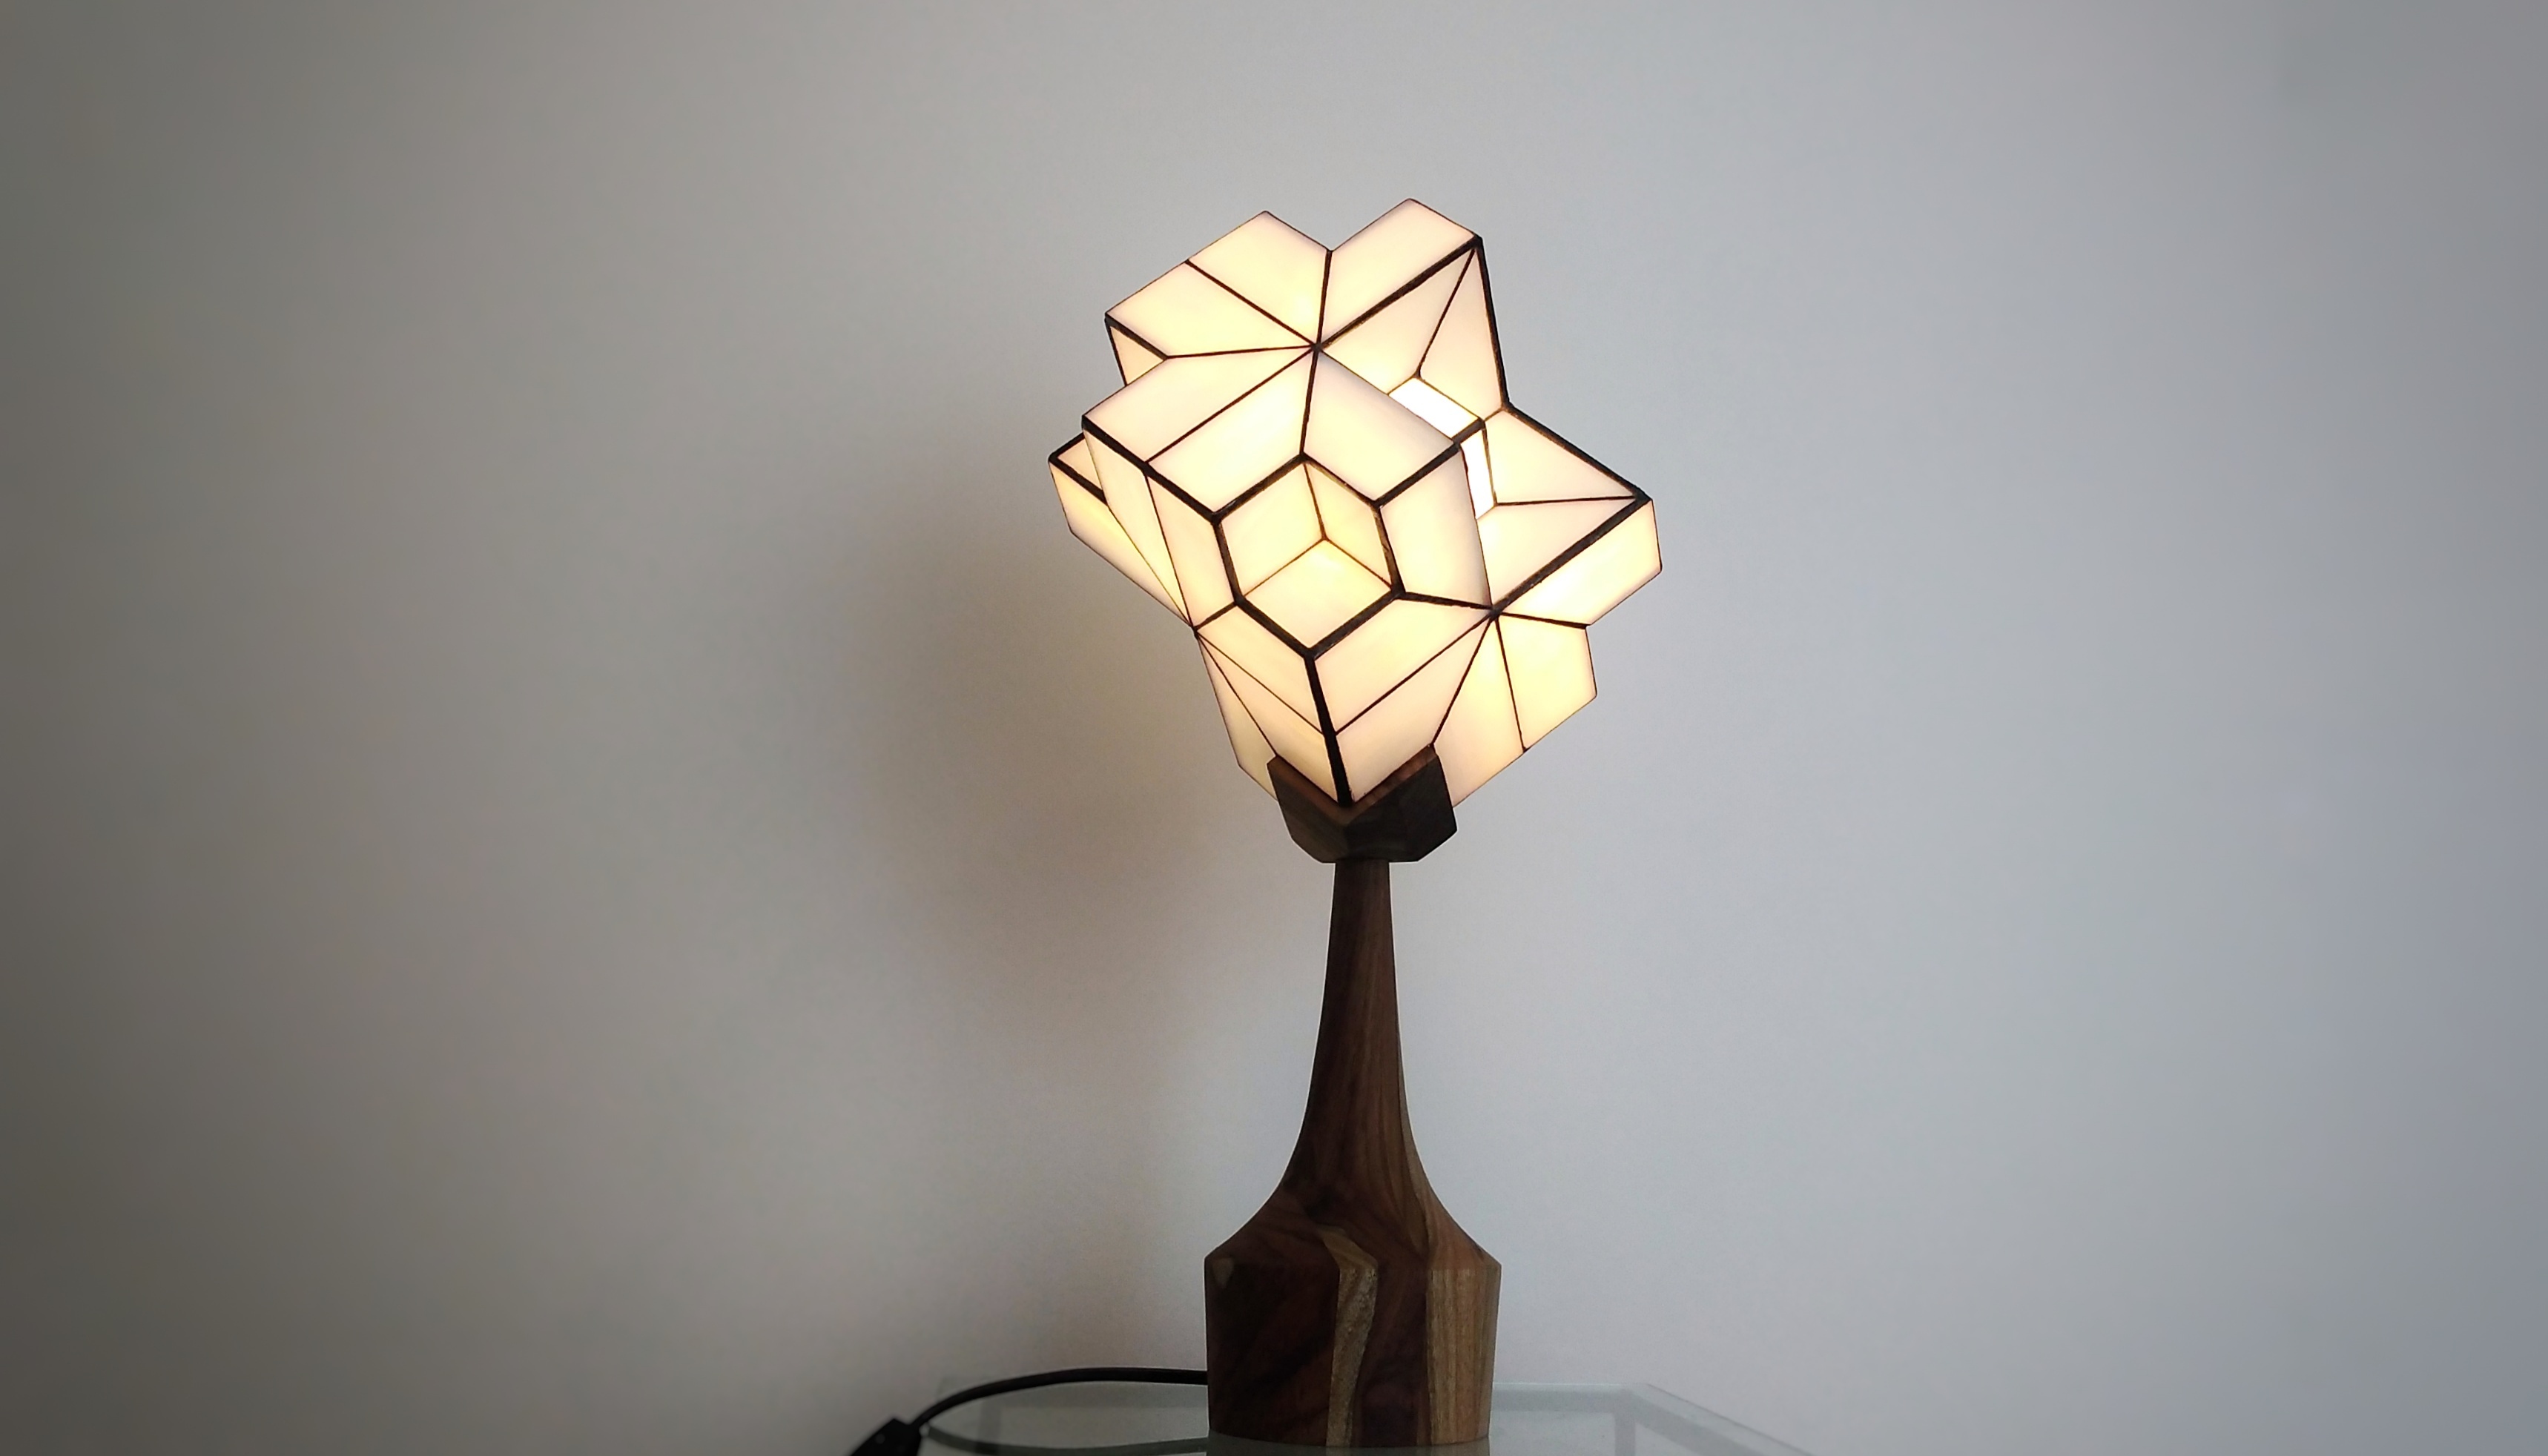 Stained glass lamps – The first work by our duo Hermansson & Linares